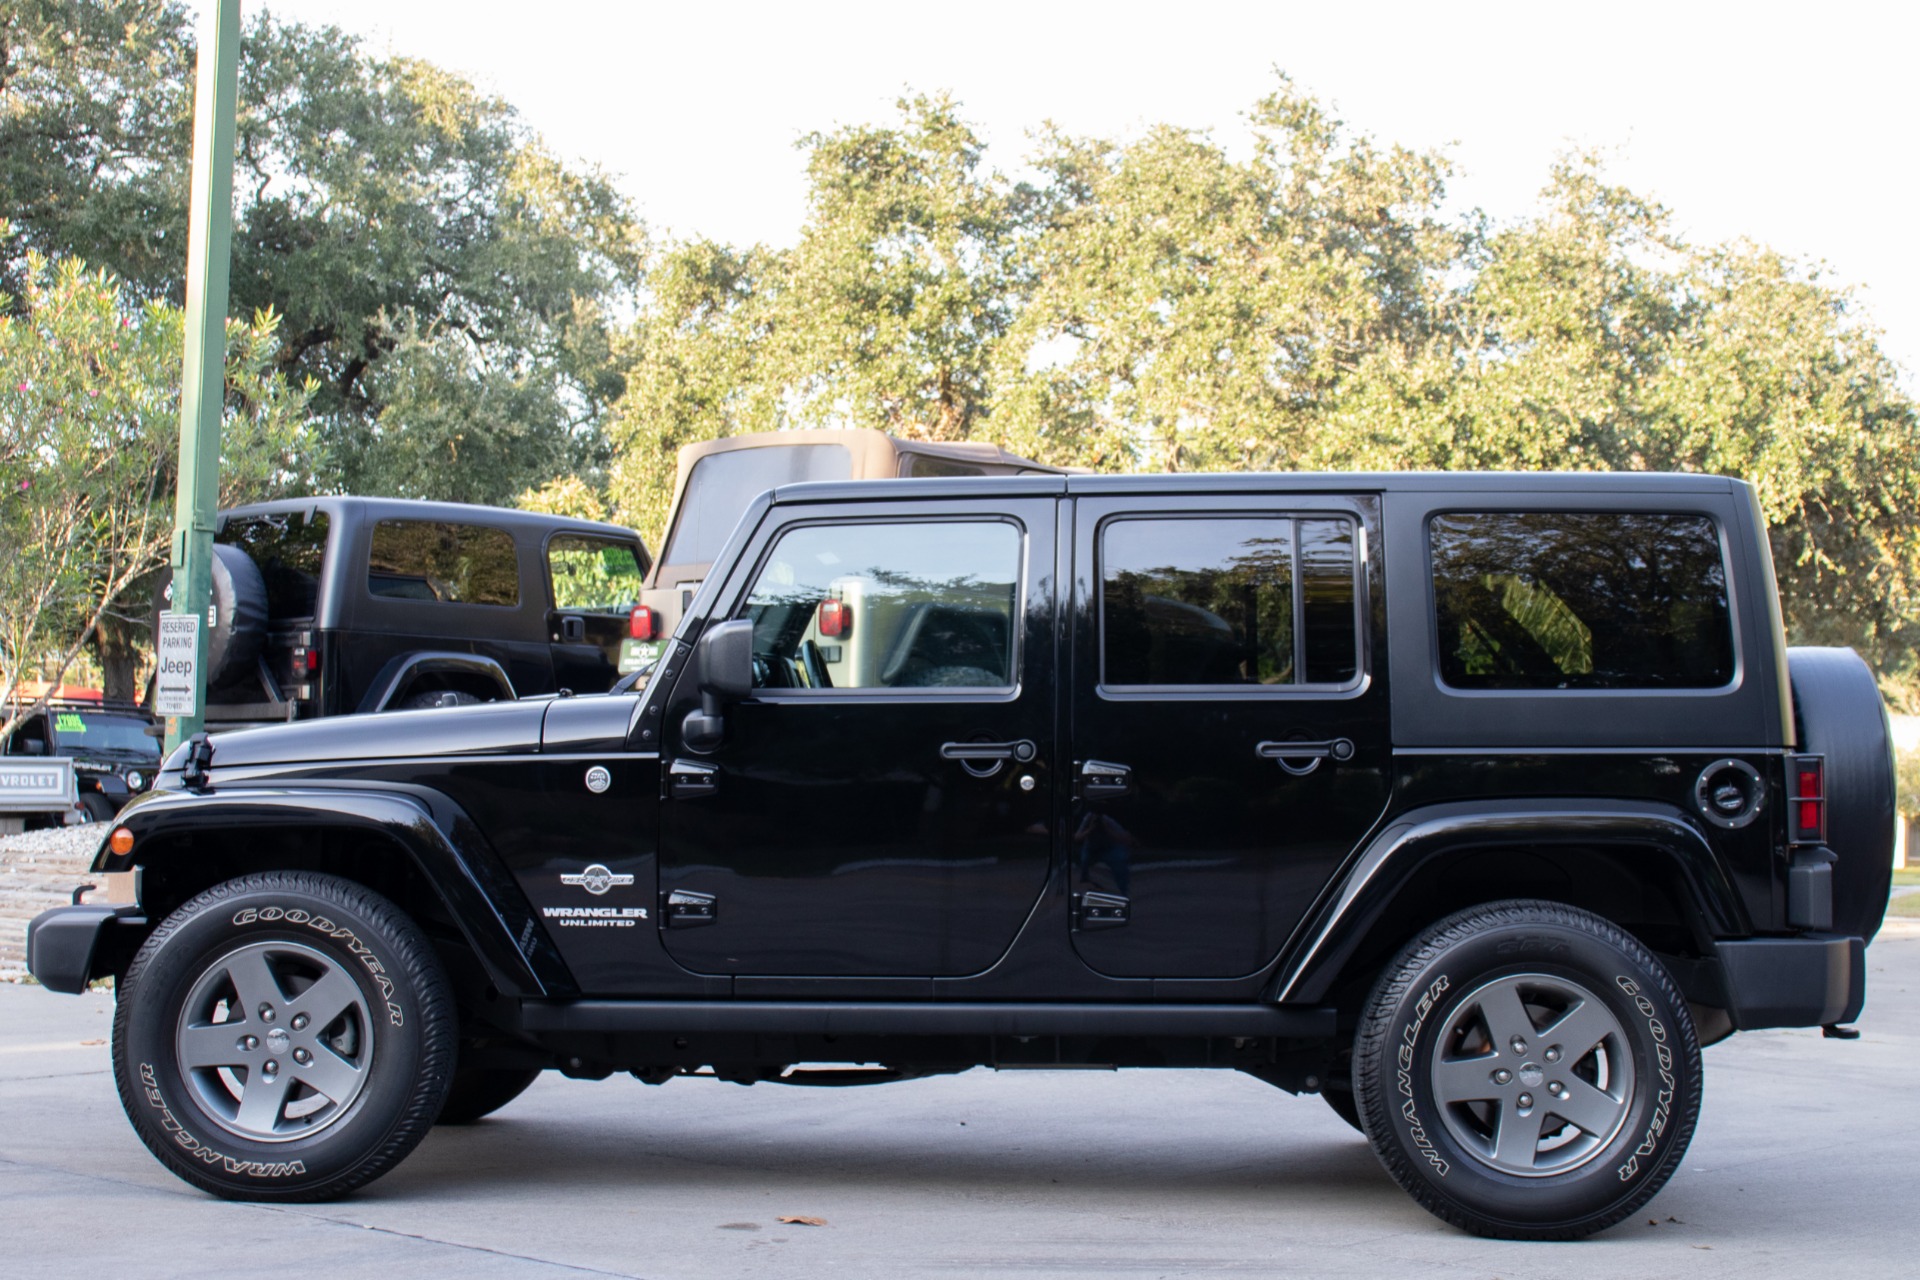 Used 2015 Jeep Wrangler Unlimited Freedom Edition For Sale ($29,995) |  Select Jeeps Inc. Stock #568538